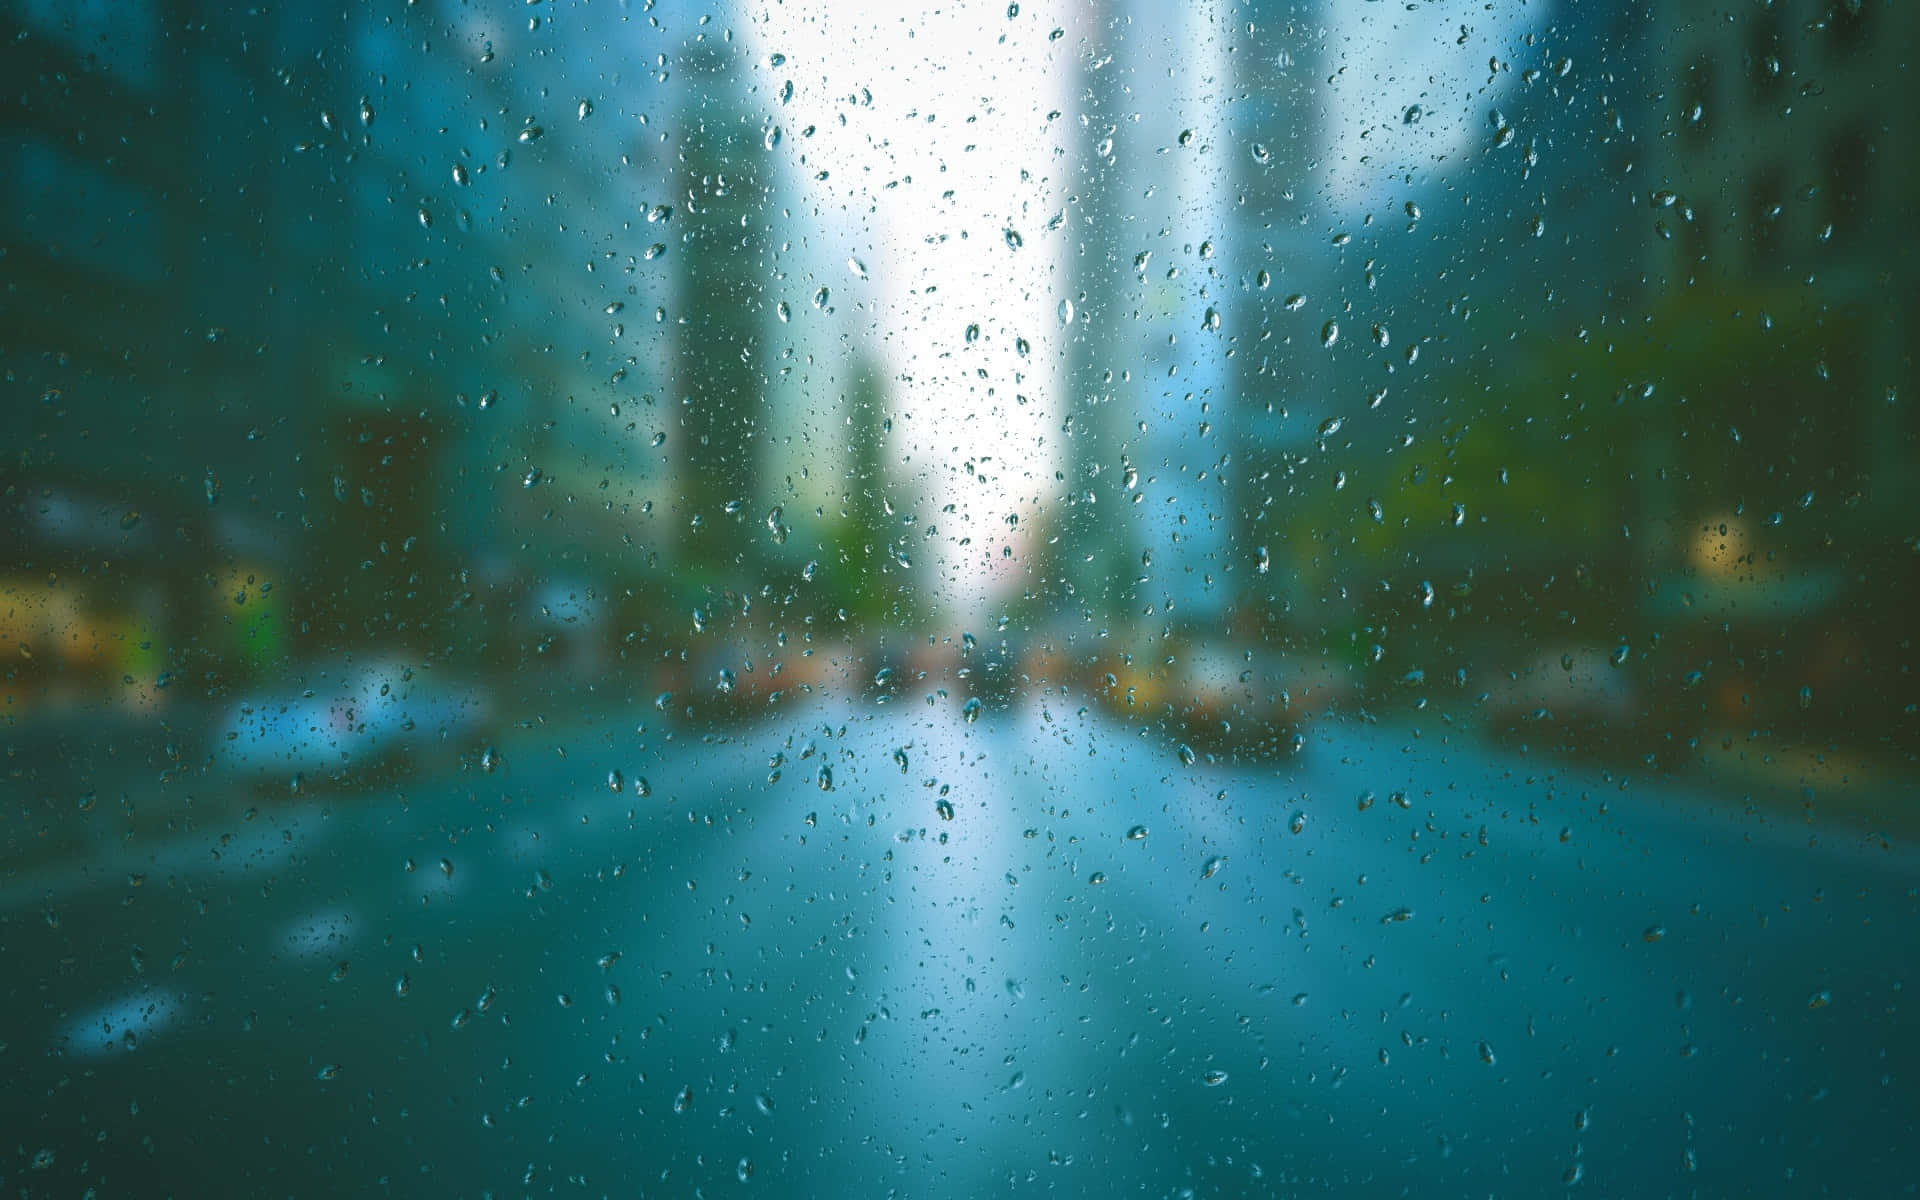 Rainy Themed Background Image Picture